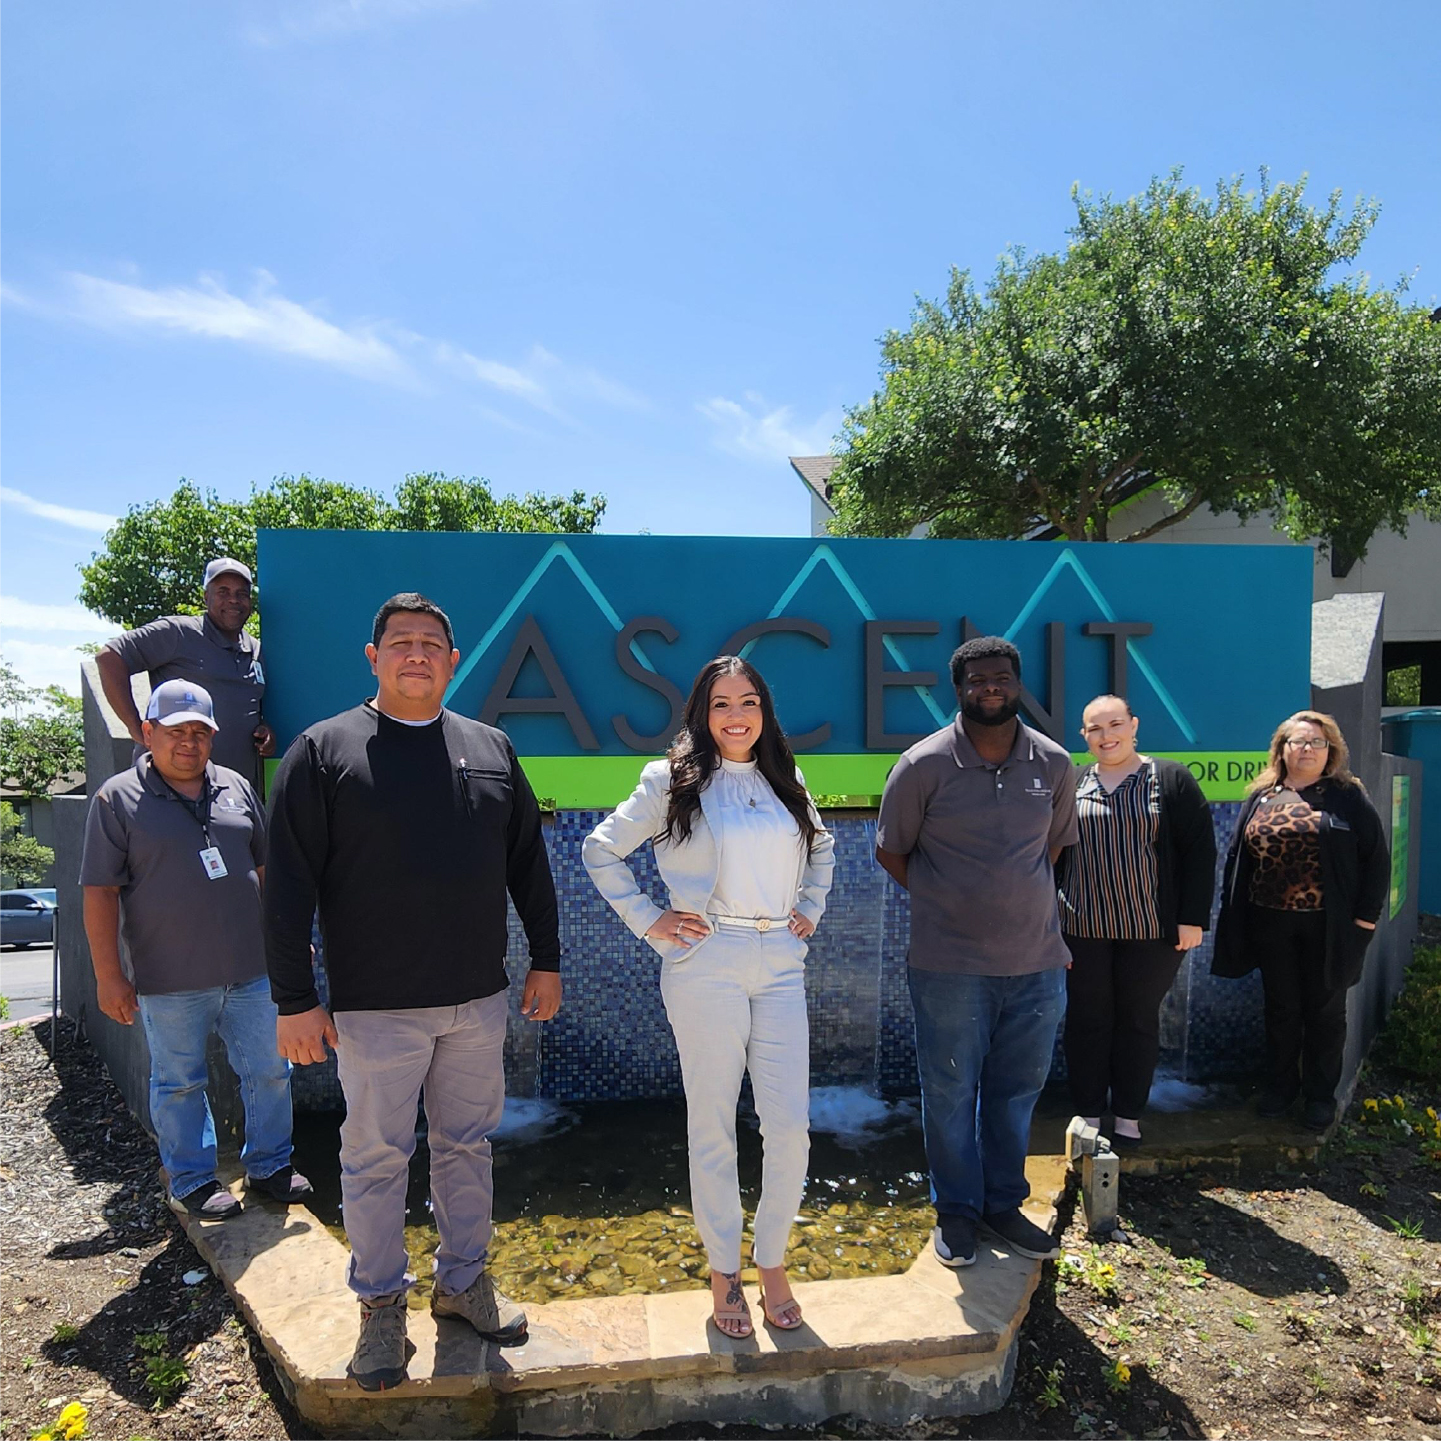 Leasing Team standing in front of community monument sign